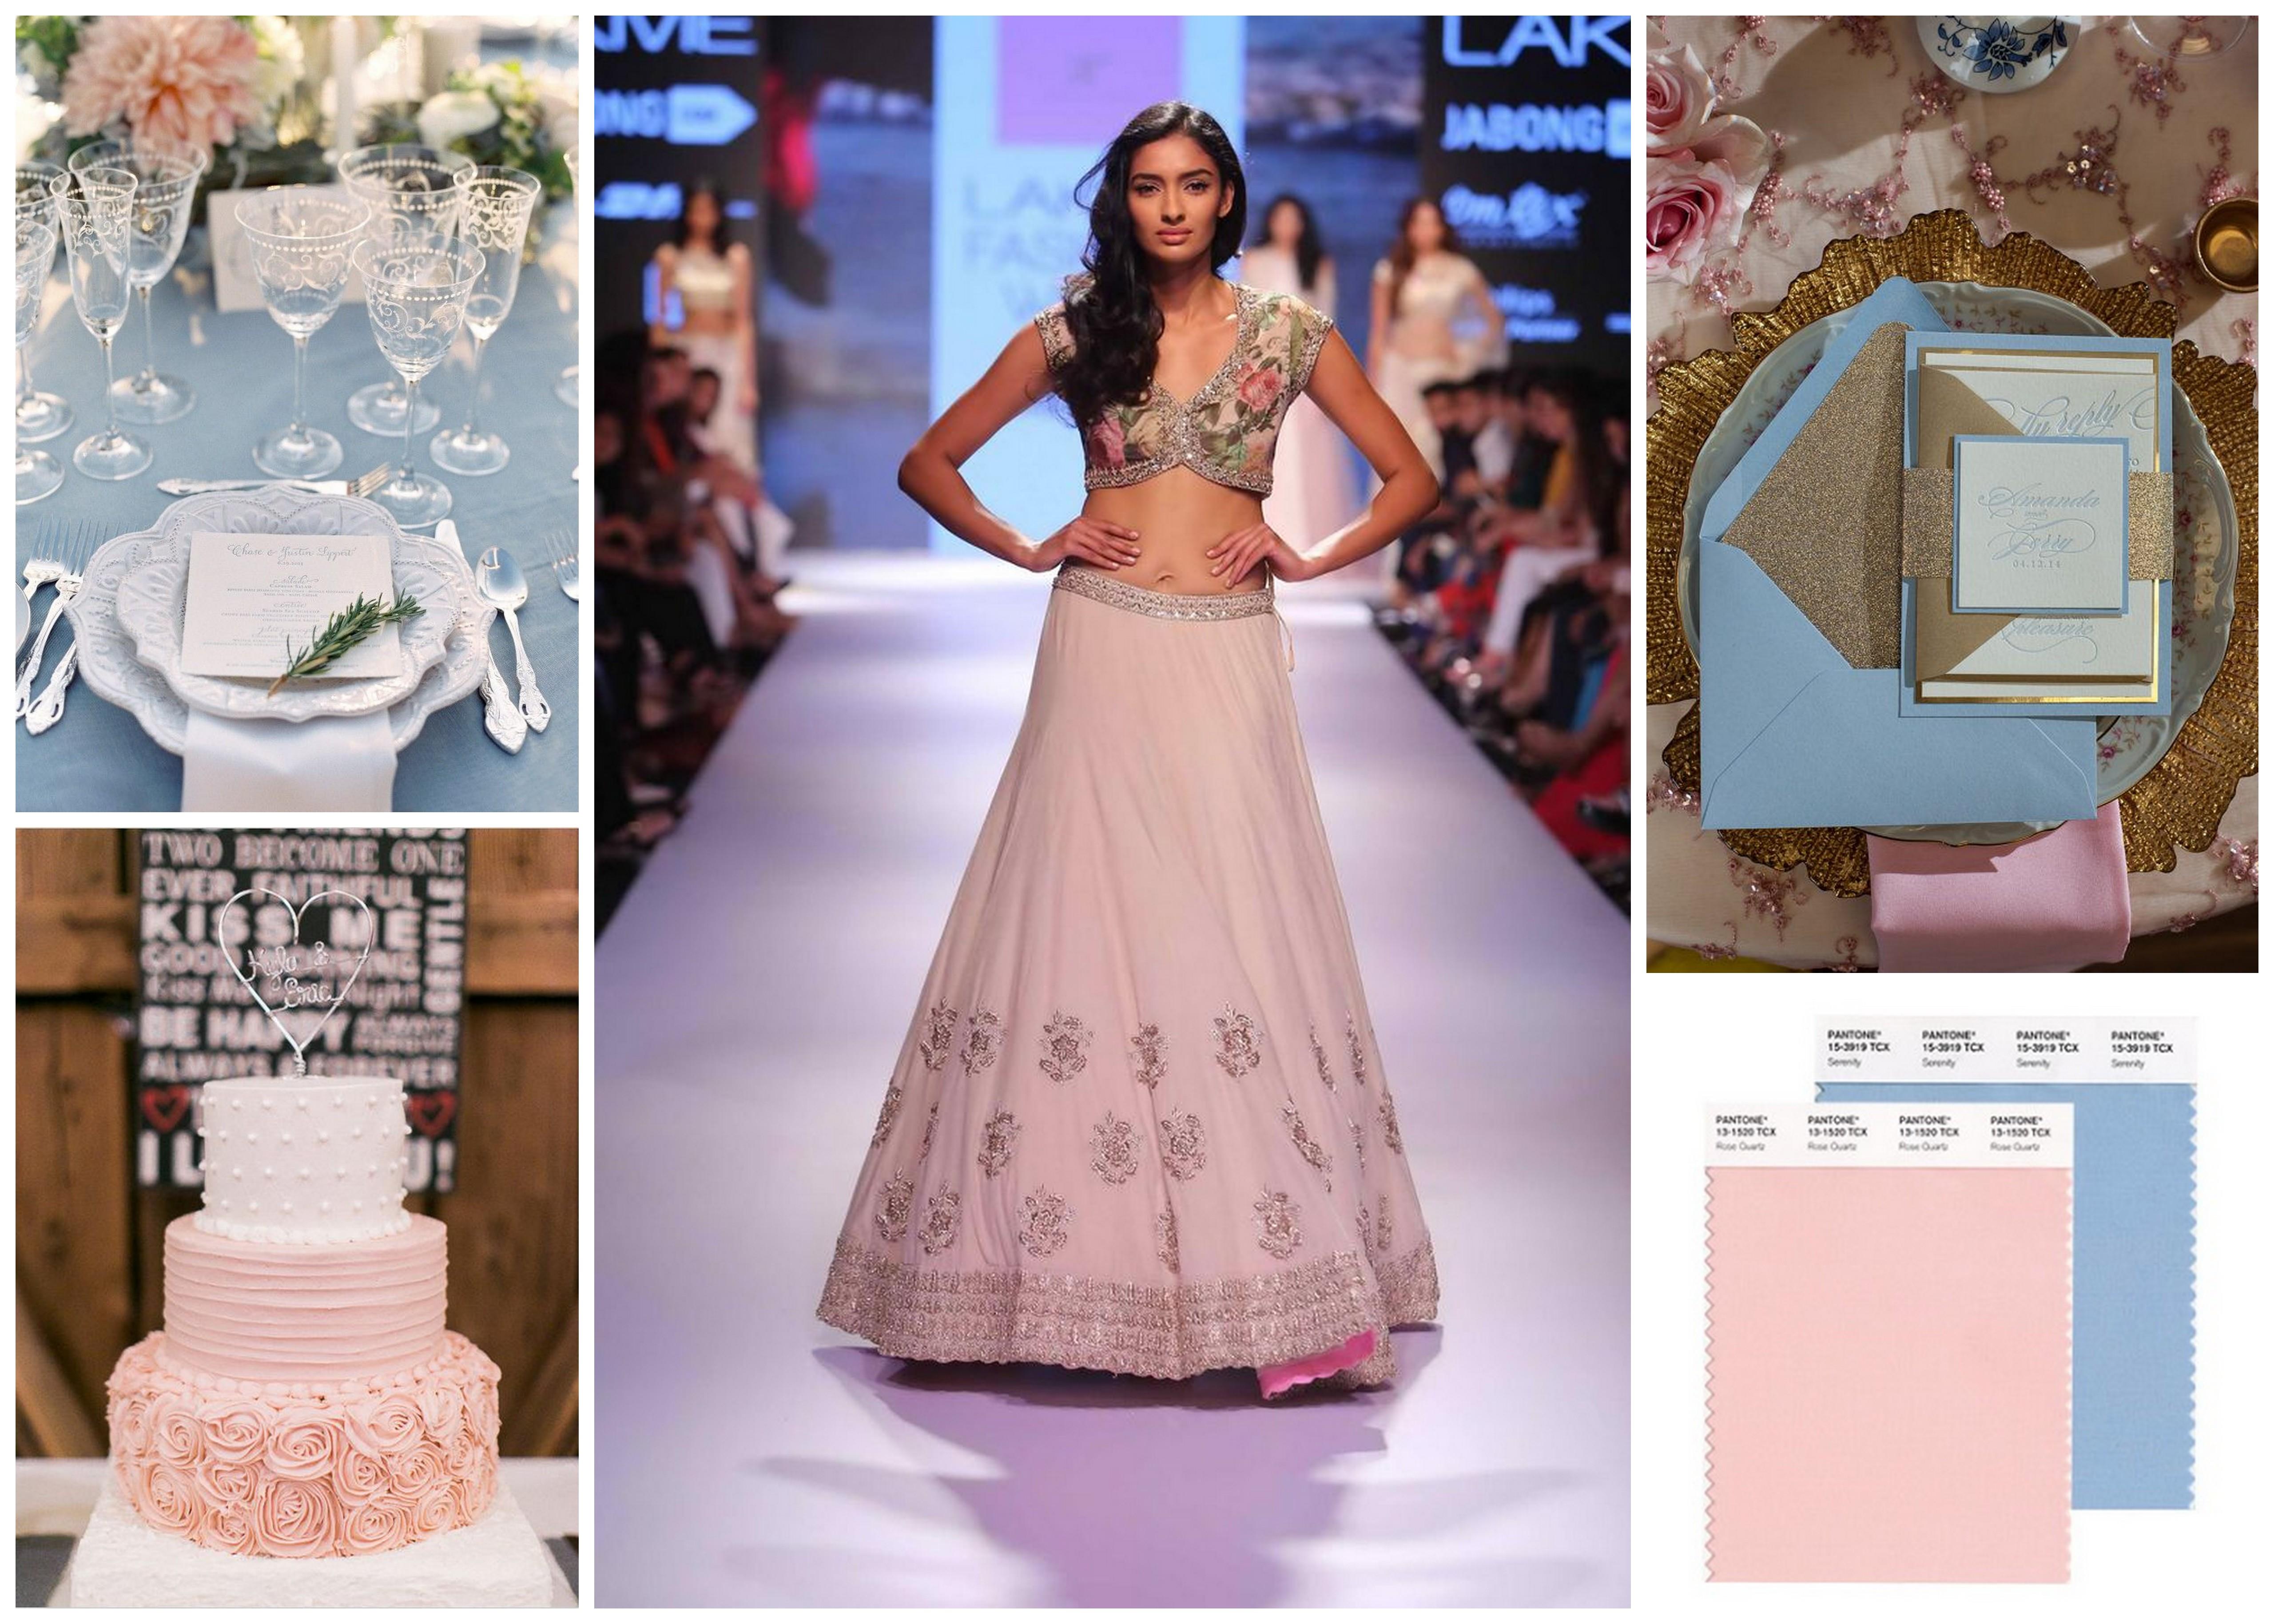 Pantone crowns Rose Quartz and Serenity As Their 2016 Colors of the Year